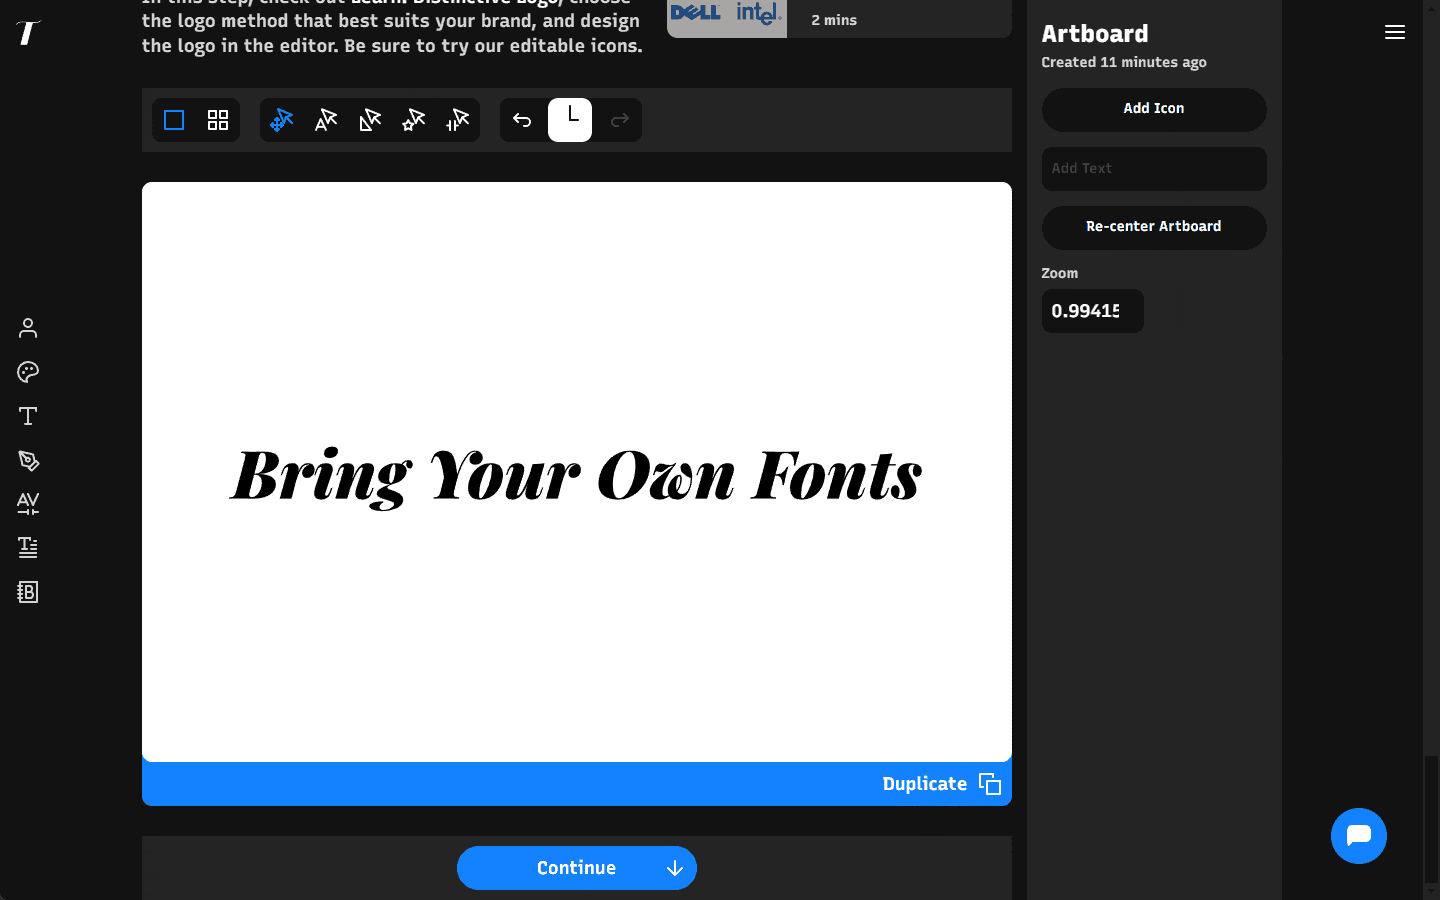 Click ‘Add My Font Files’ in the drop-down and choose your fonts with the file picker.